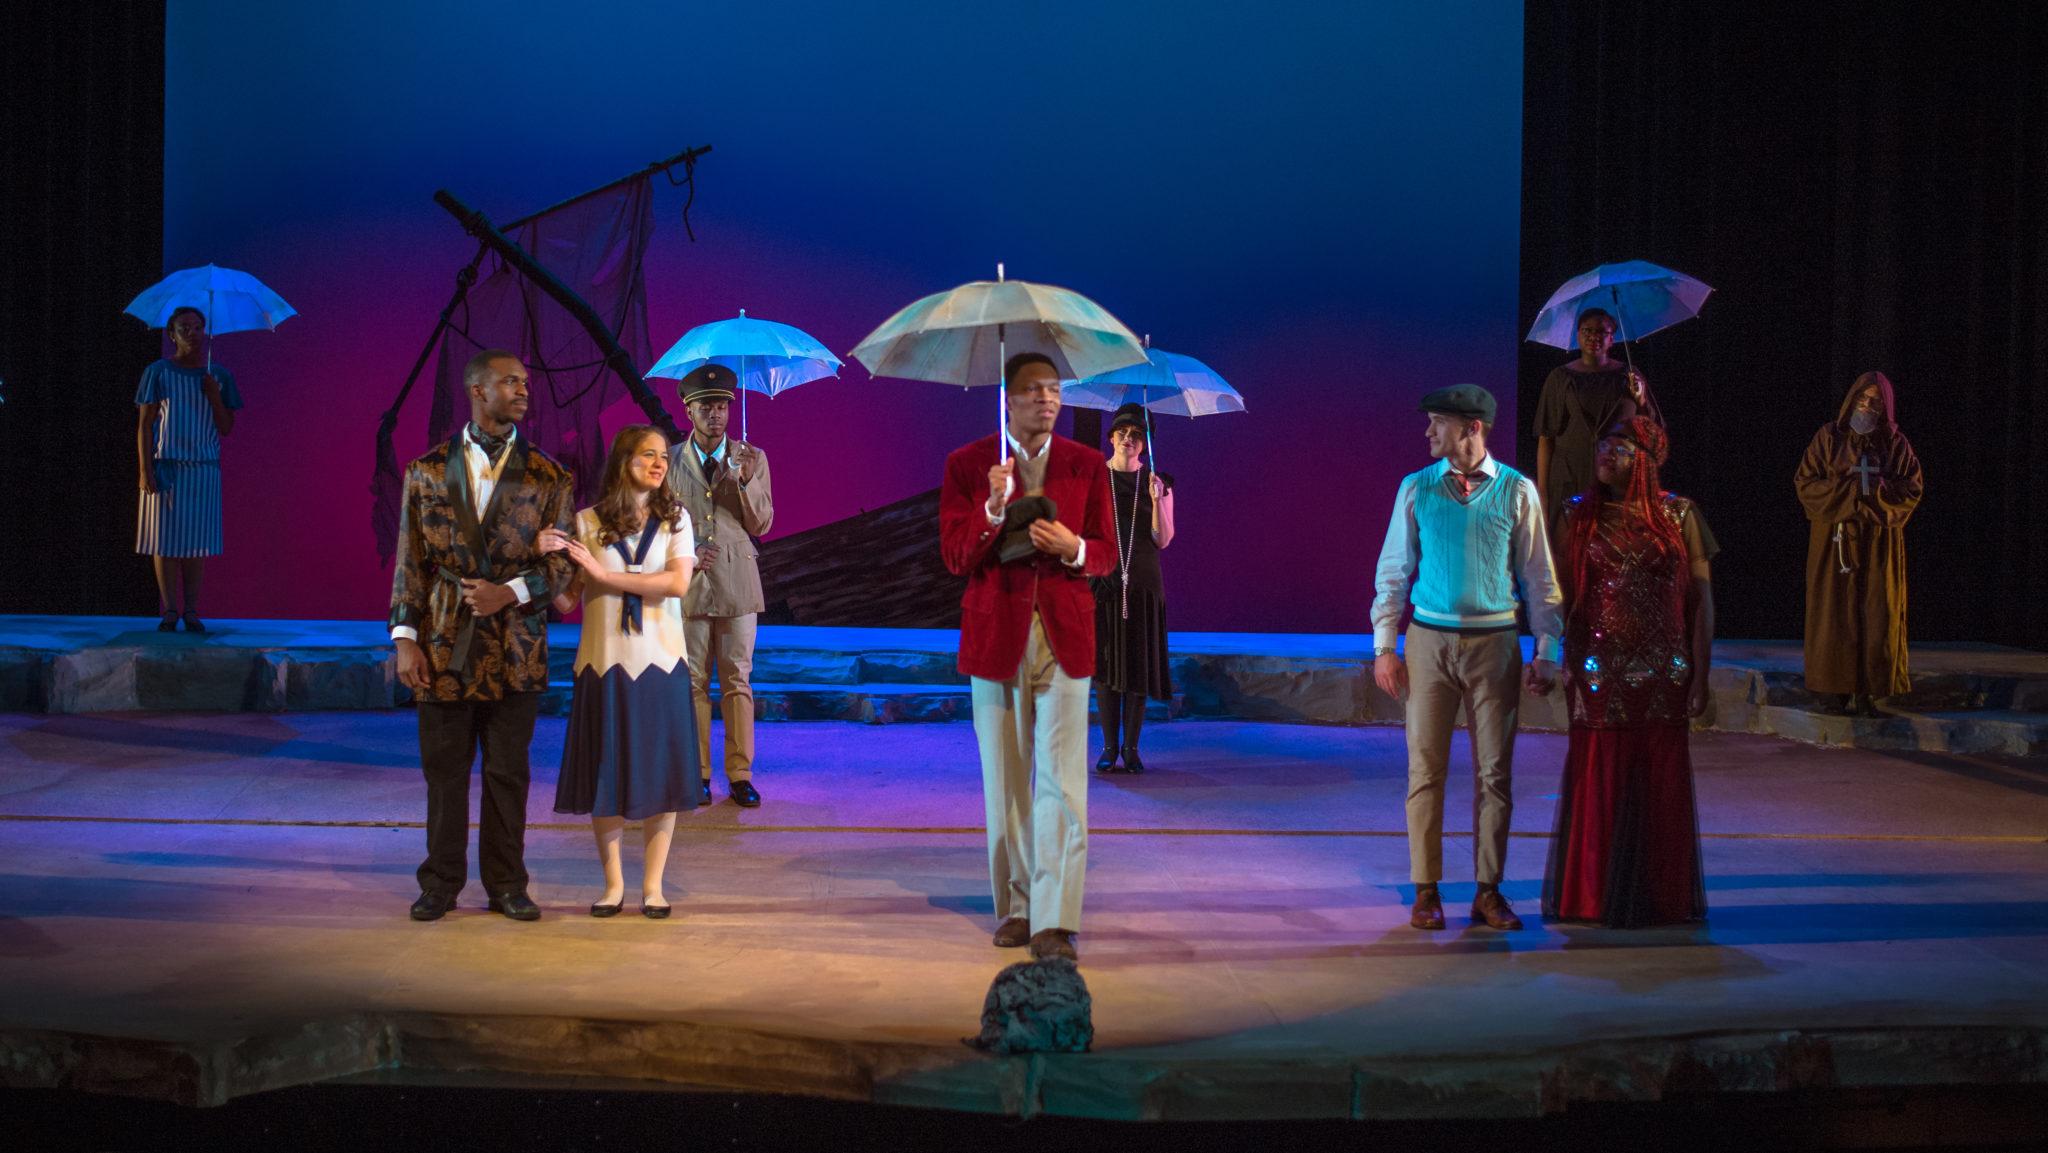 Cast of Twelfth Night on stage, some holding umbrellas